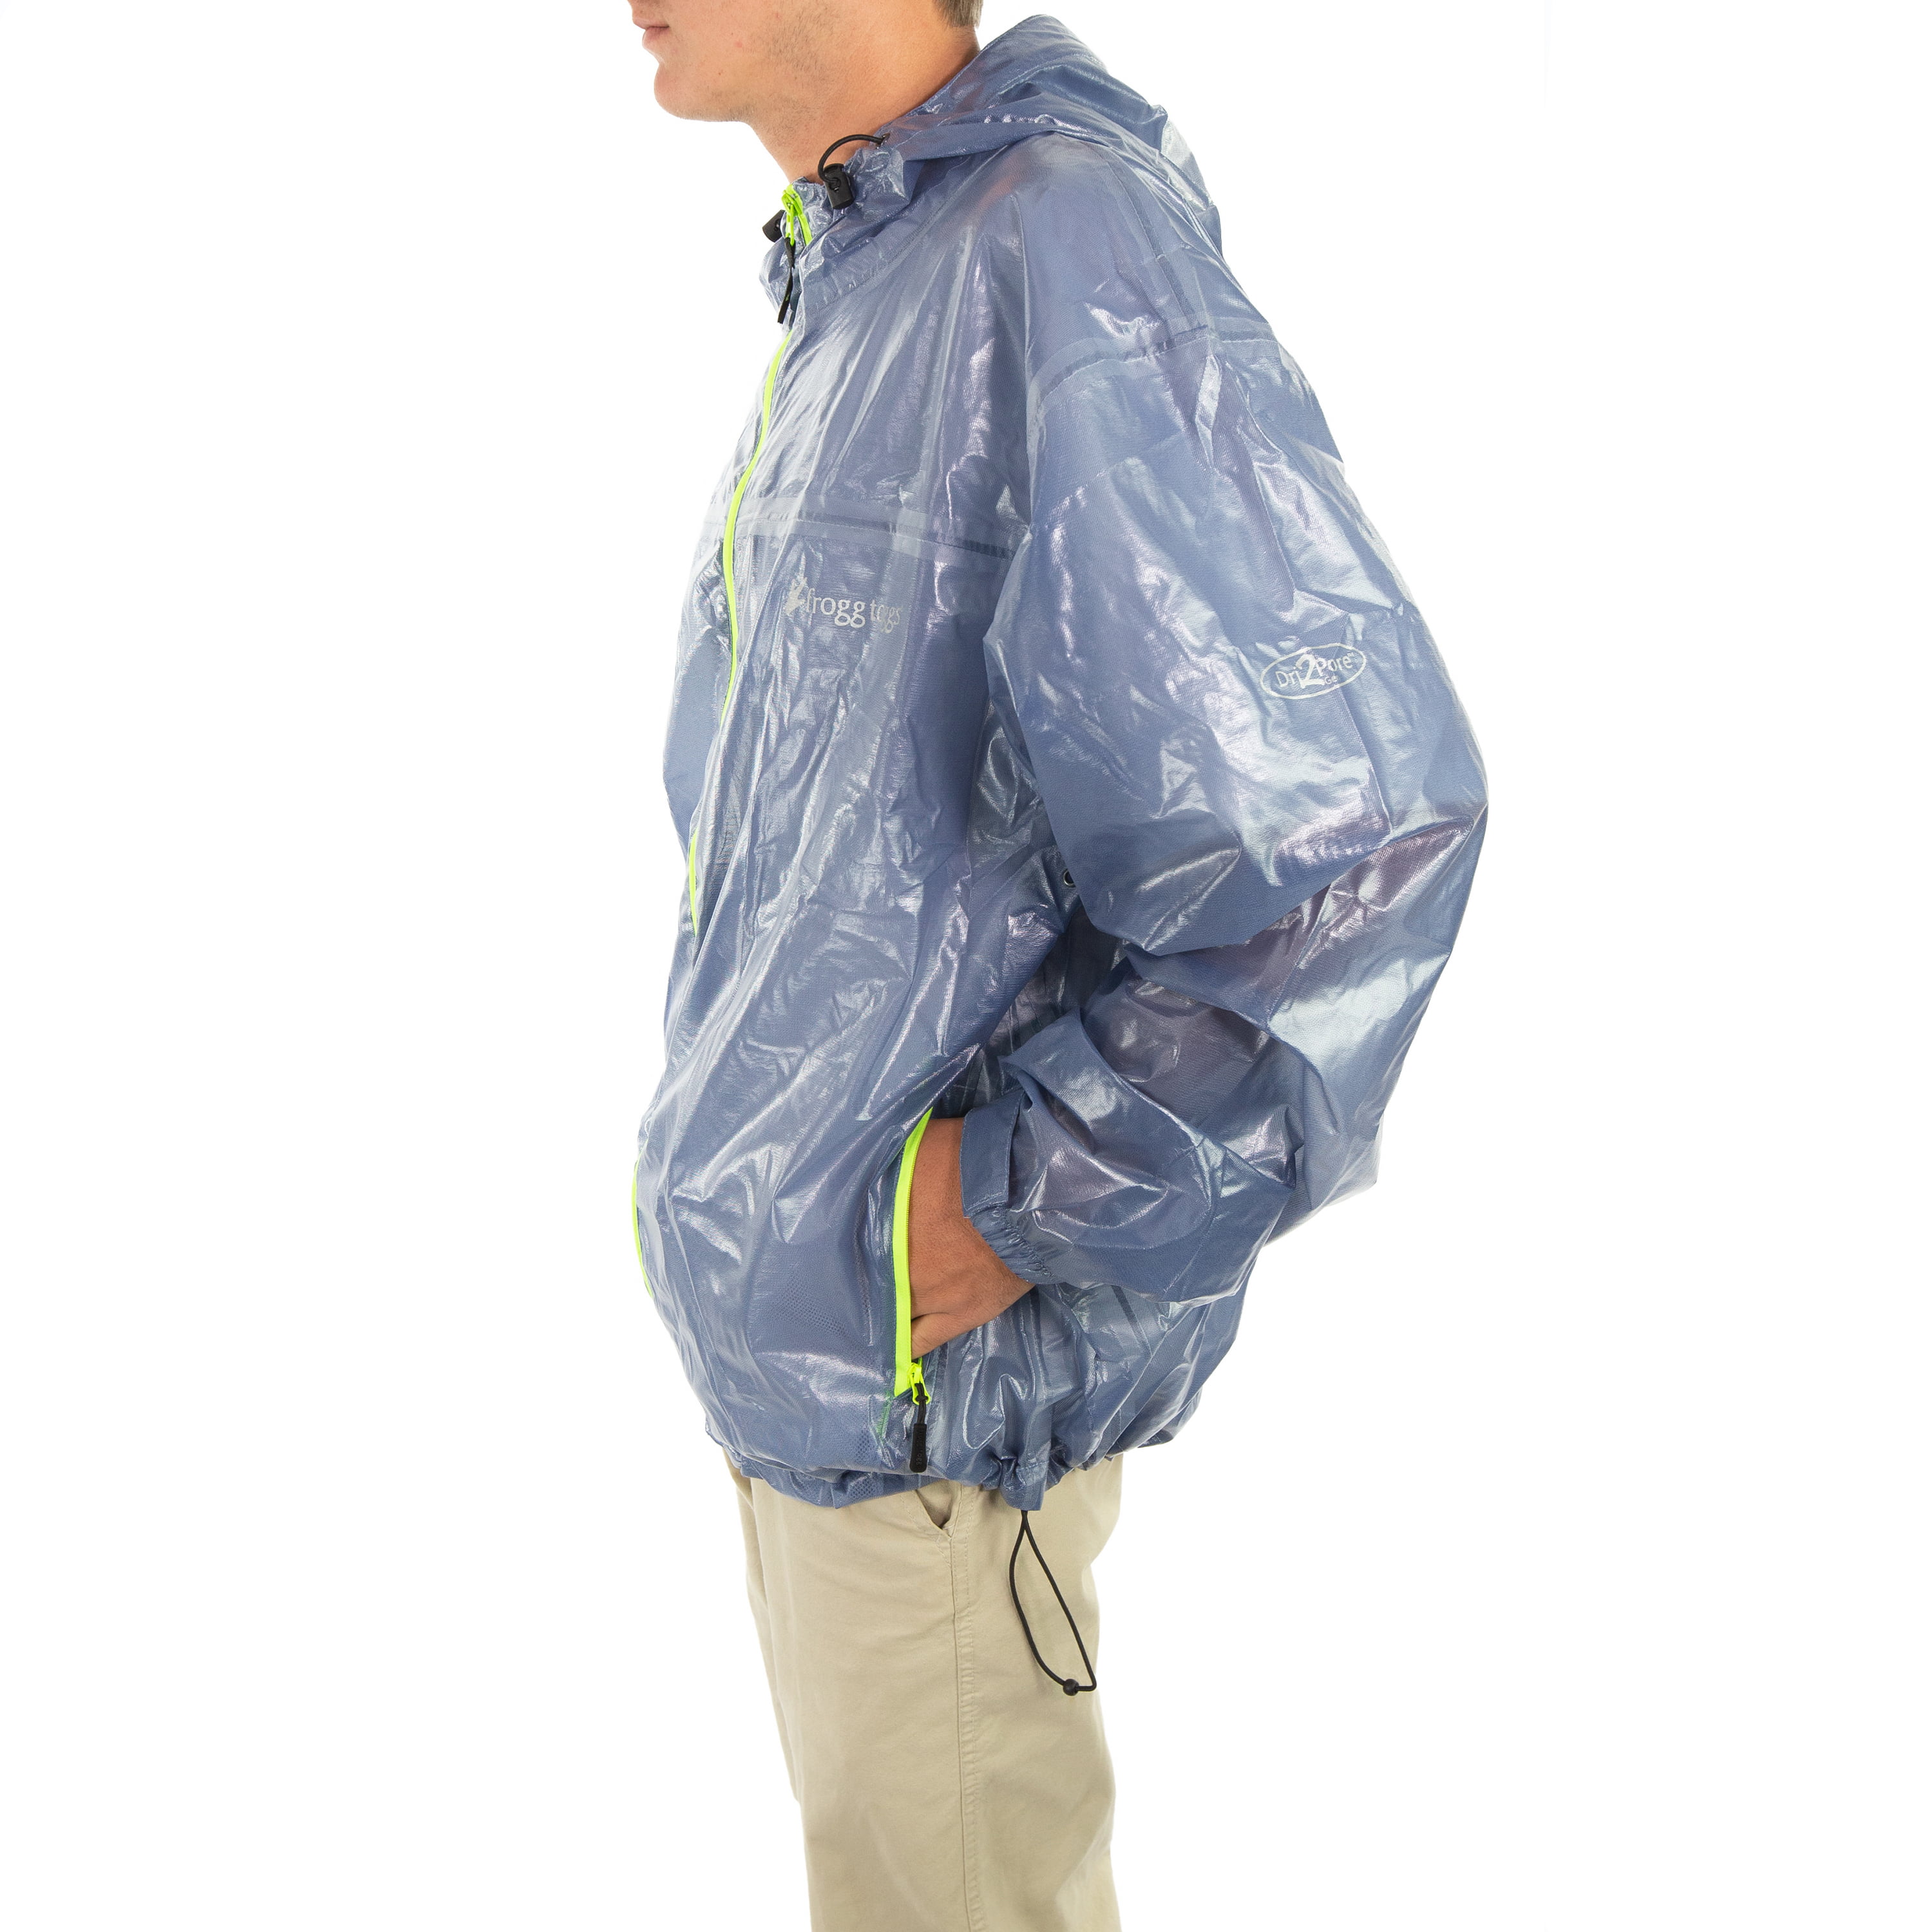 Frogg Toggs Xtreme Lite Rain Jacket with Set-in Sleeves (Men's)